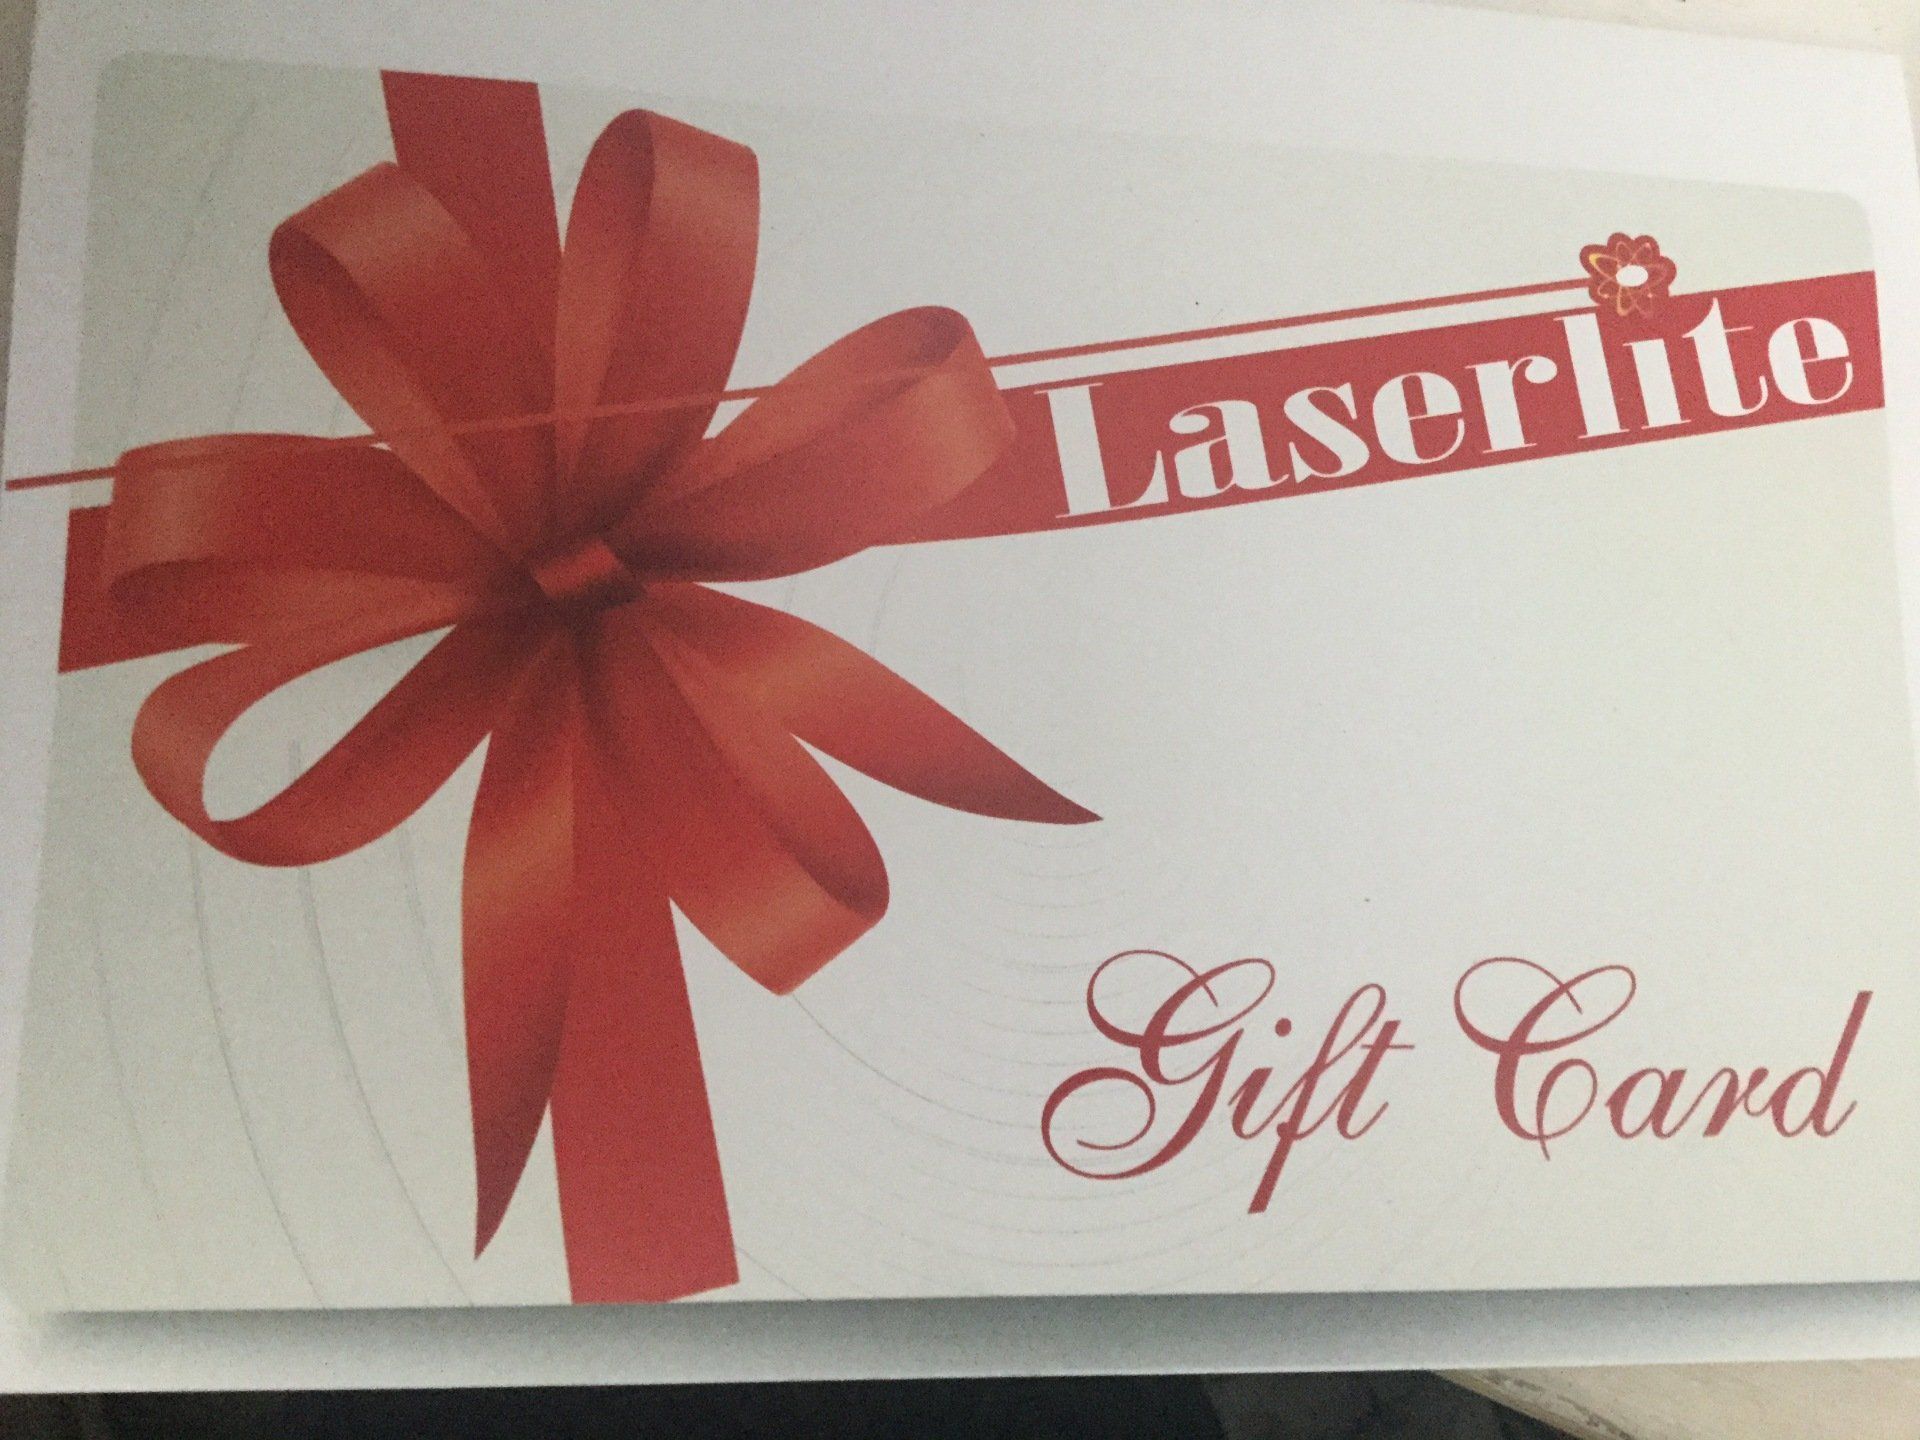 a laserlite gift card with a red bow